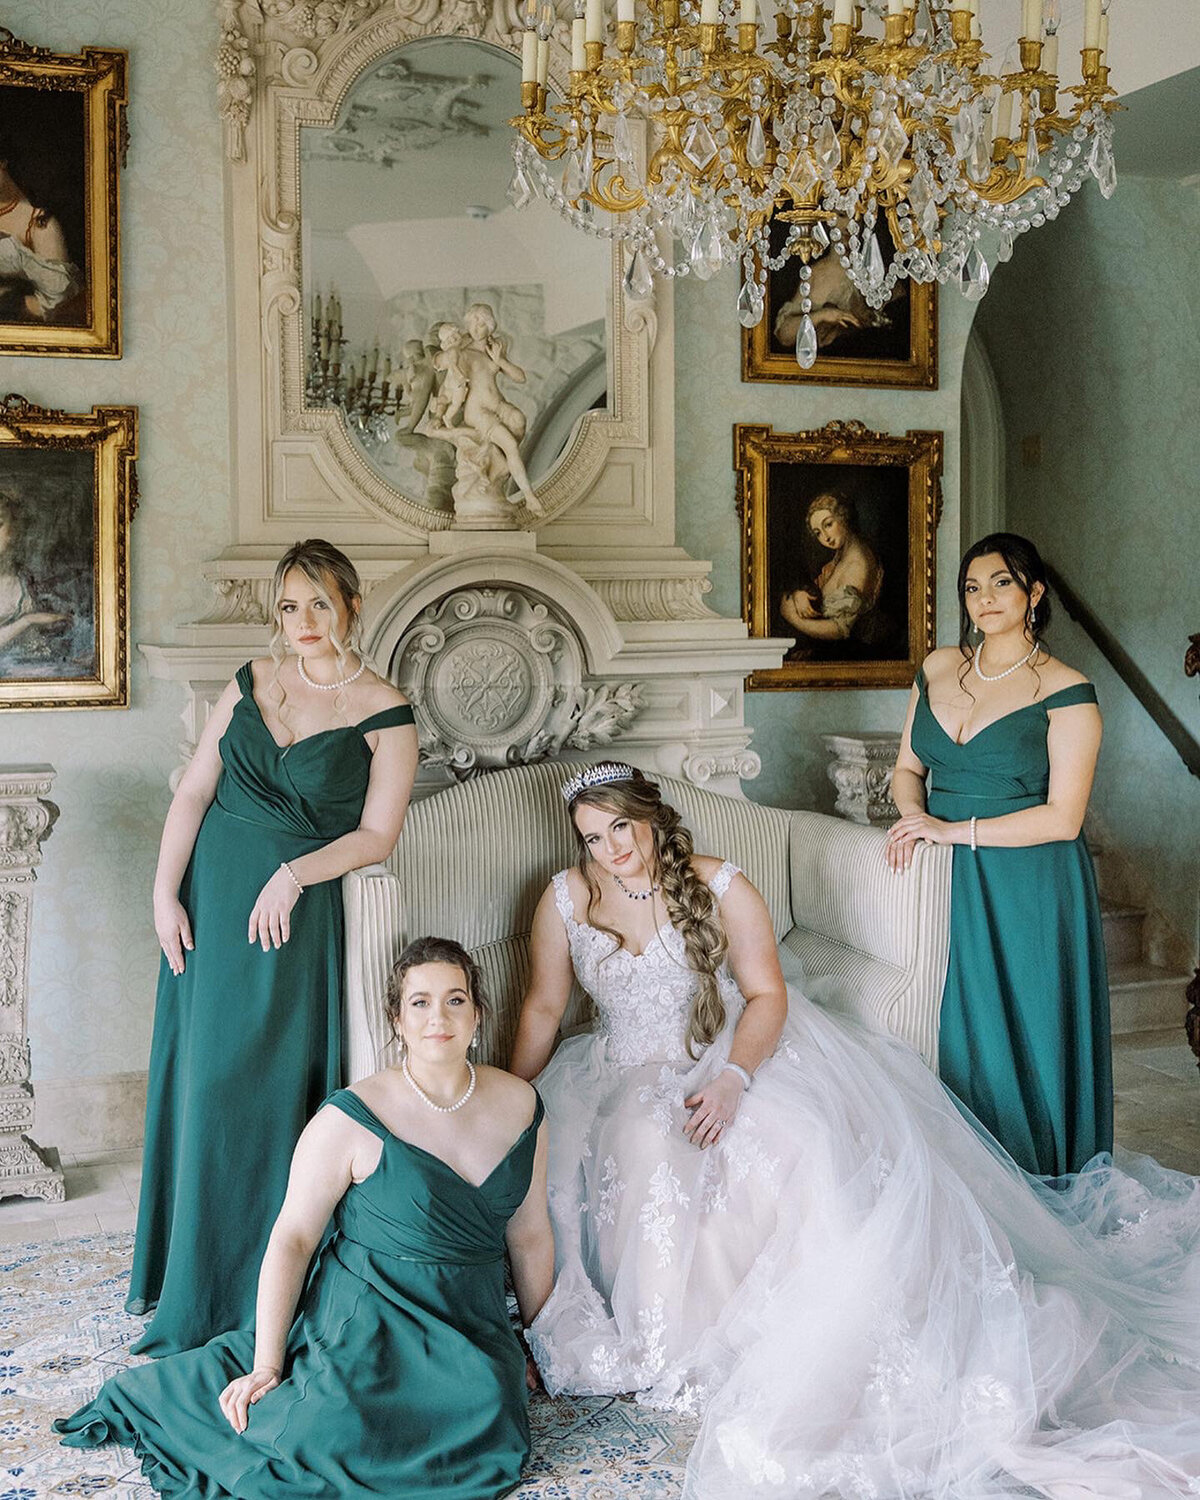 Bride wearing her bridal gown sitting down on a white chair while her girls wearing green gowns standing beside her